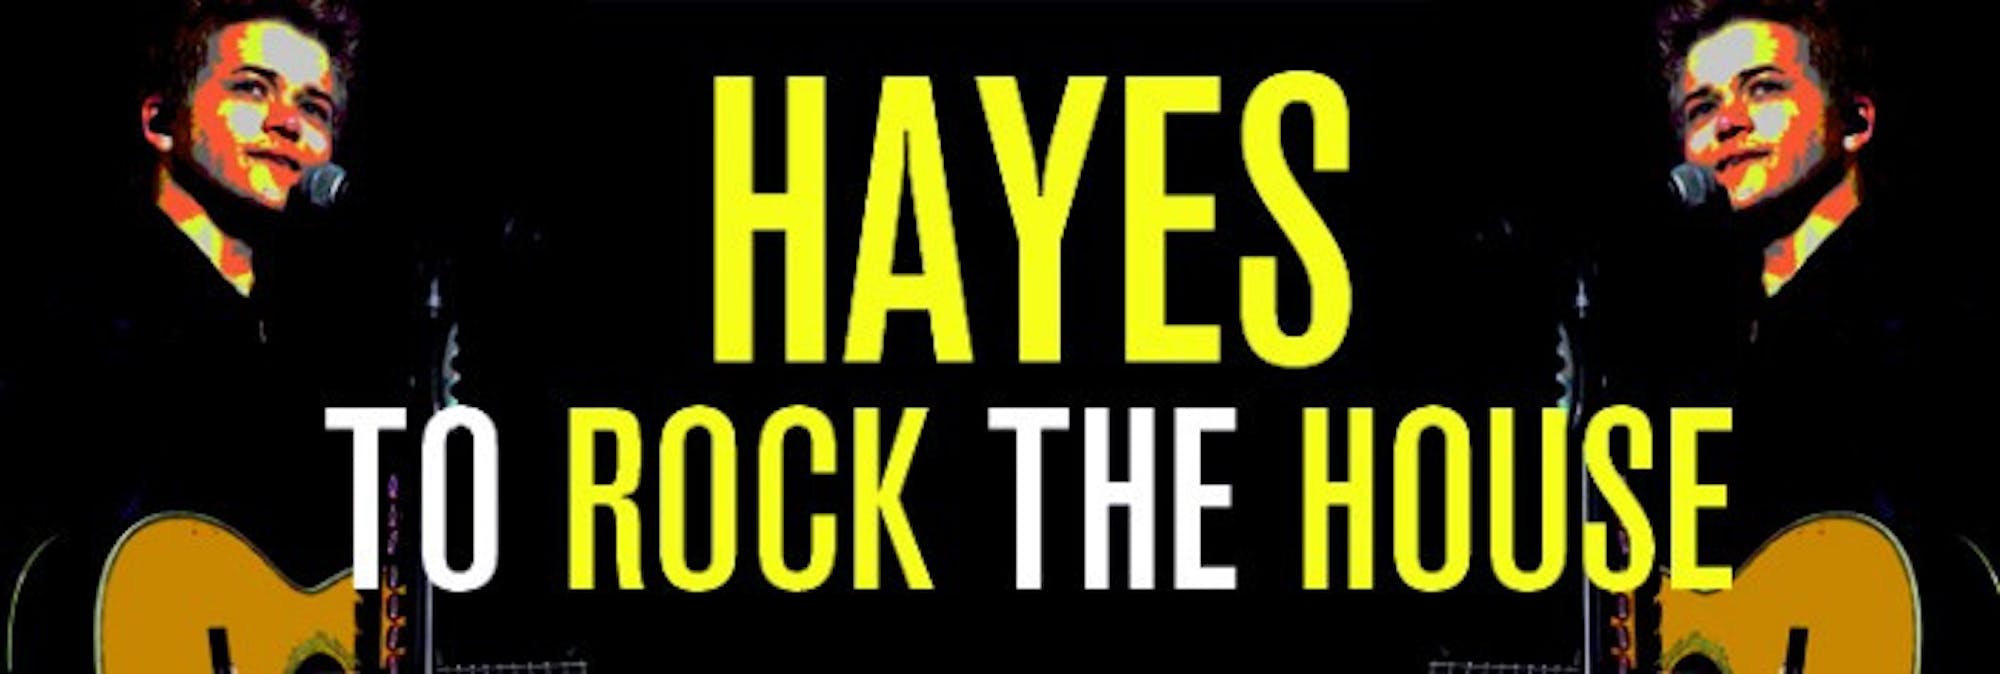 Hayes_Banner_Web